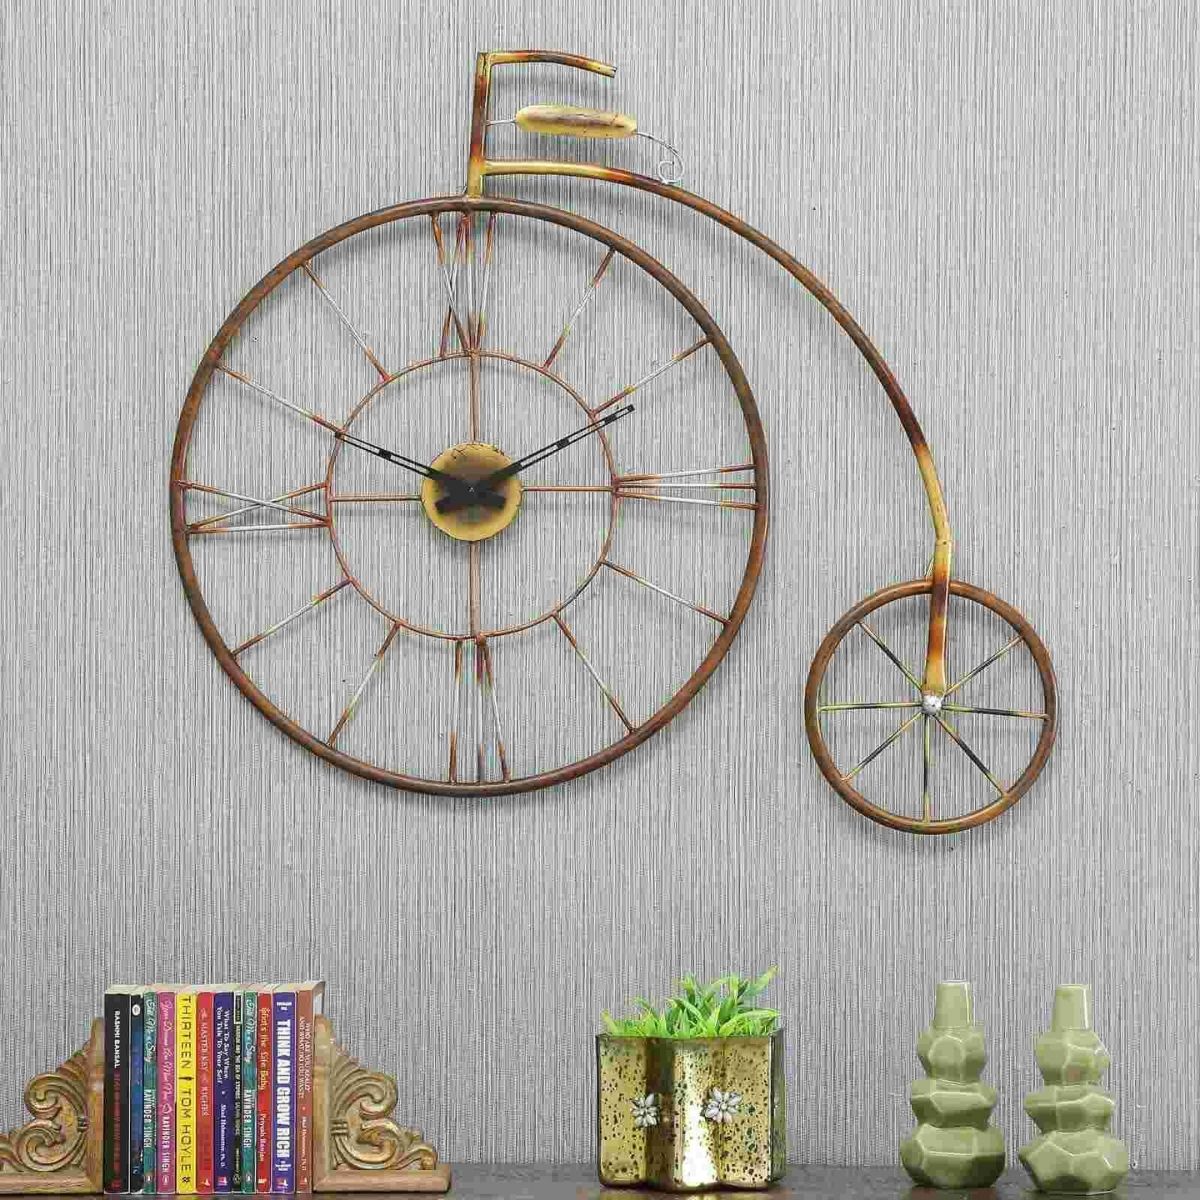 Buy Amazing Metal Wall Clock for Home & Office Decor